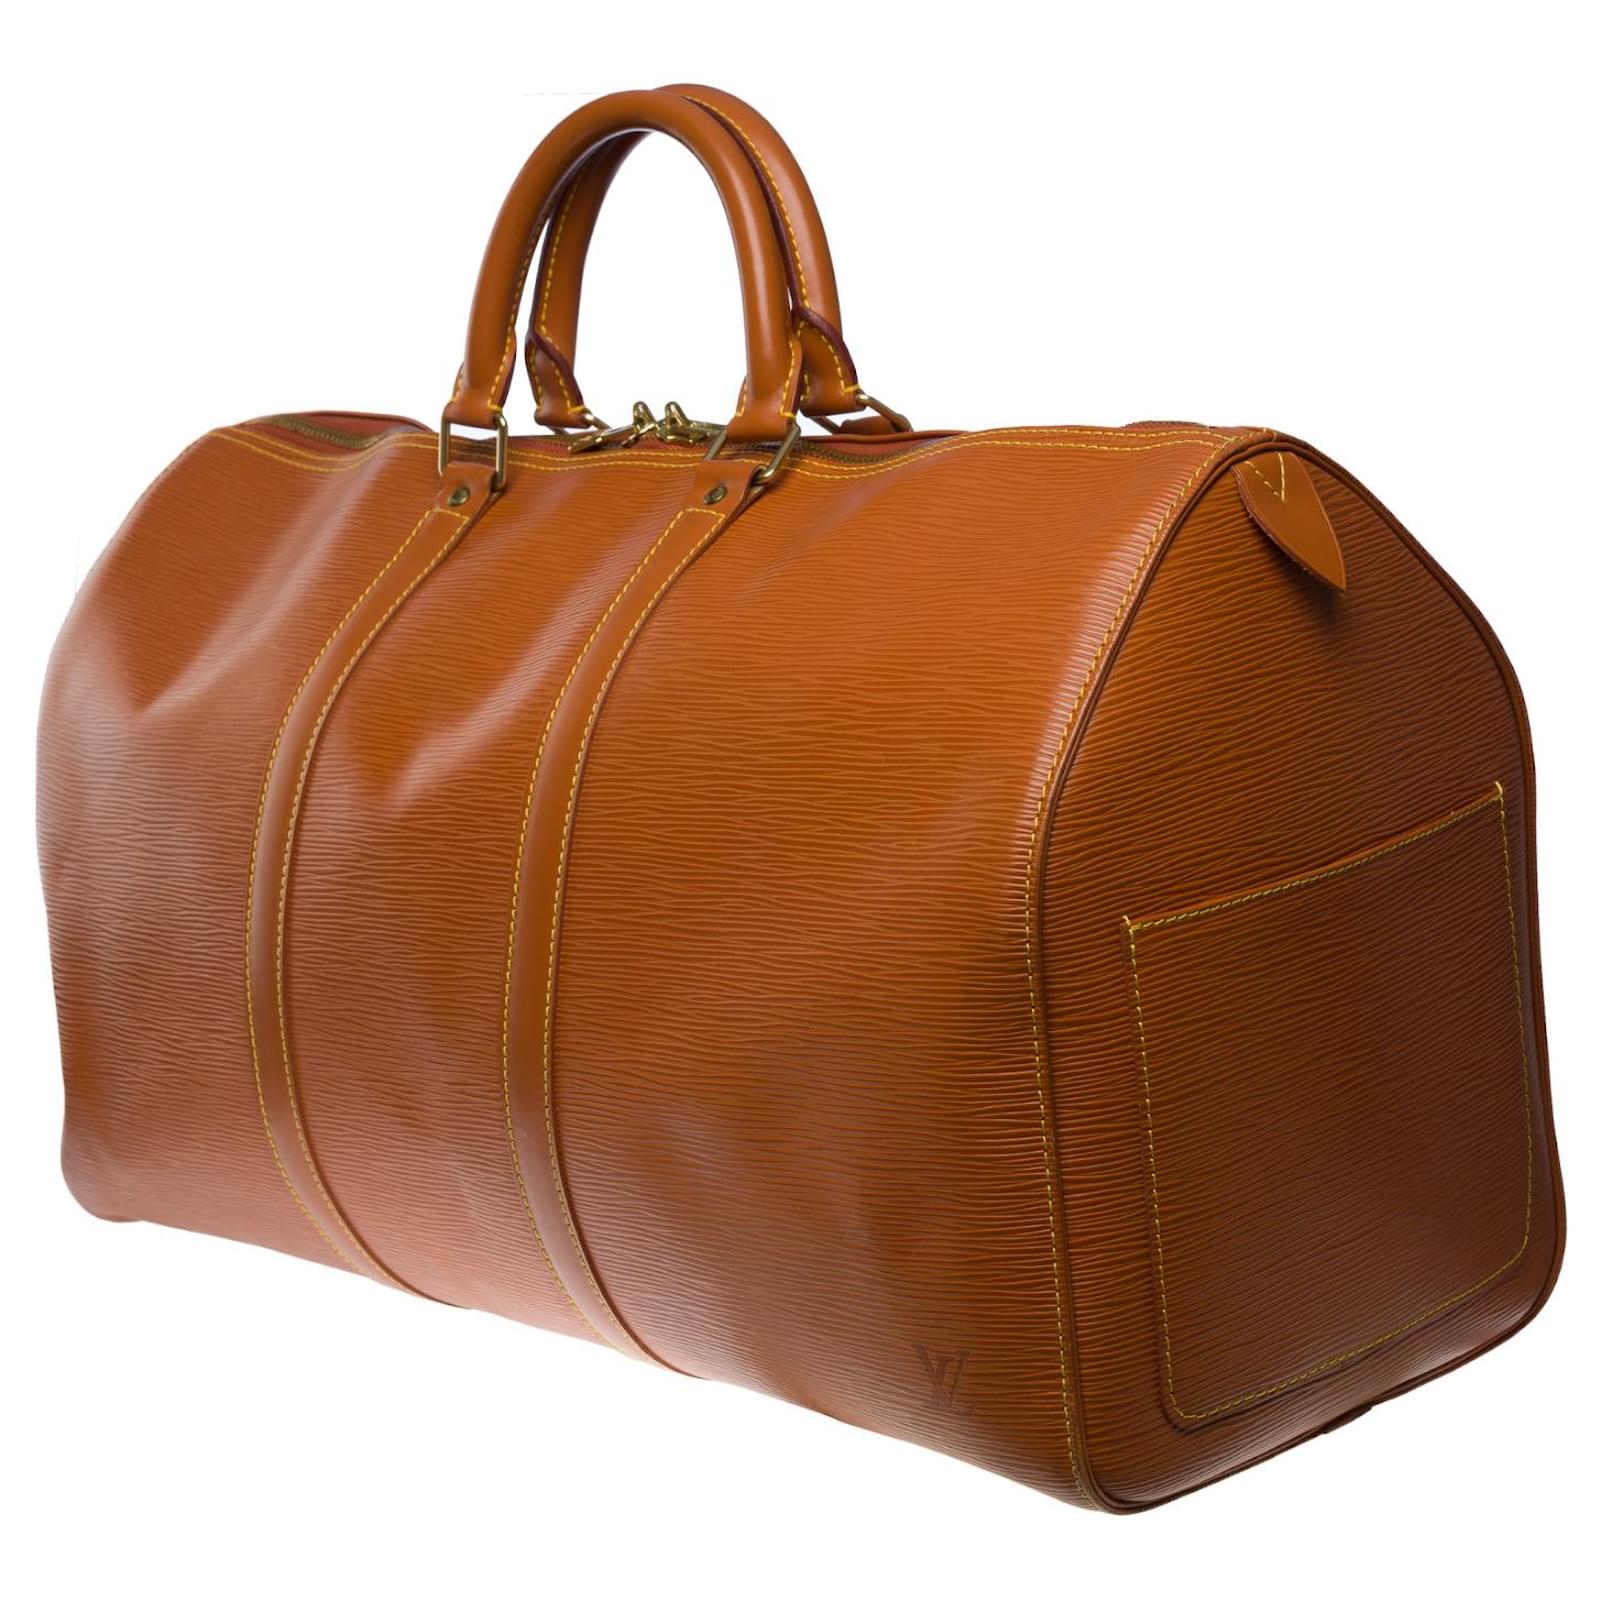 Louis Vuitton Keepall 50 Travel bag in Cognac épi leather at